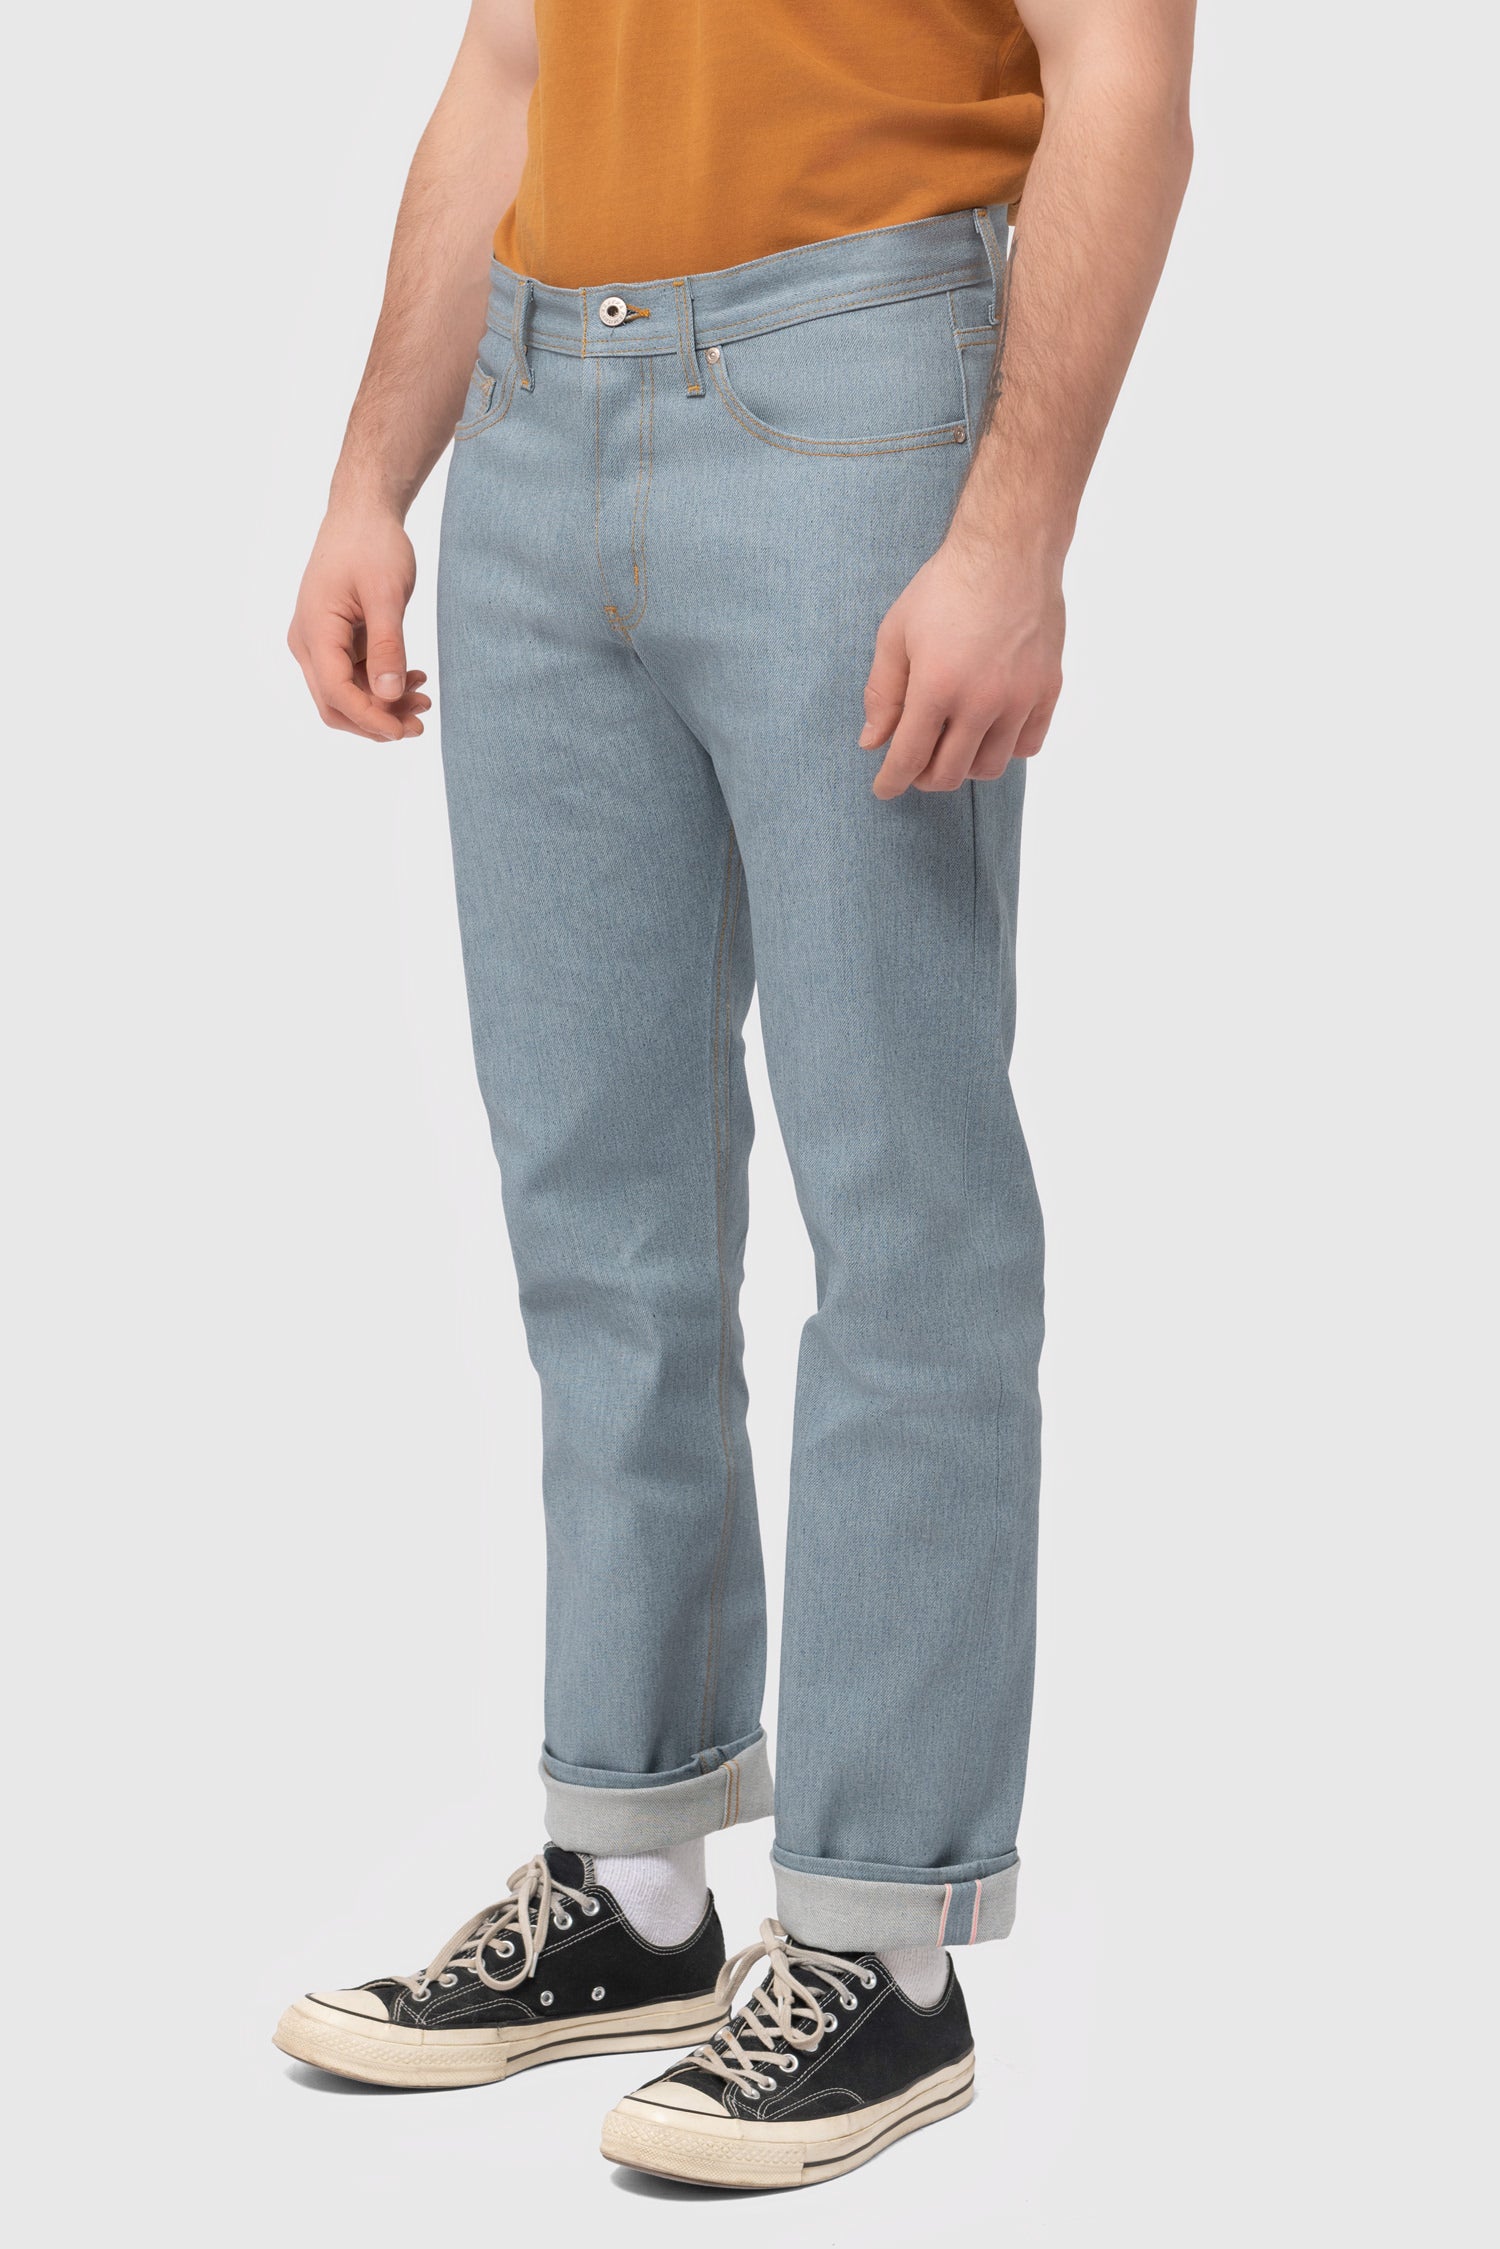 Men's Naked & Famous Weird Guy in Recycled Selvedge Stone Blue